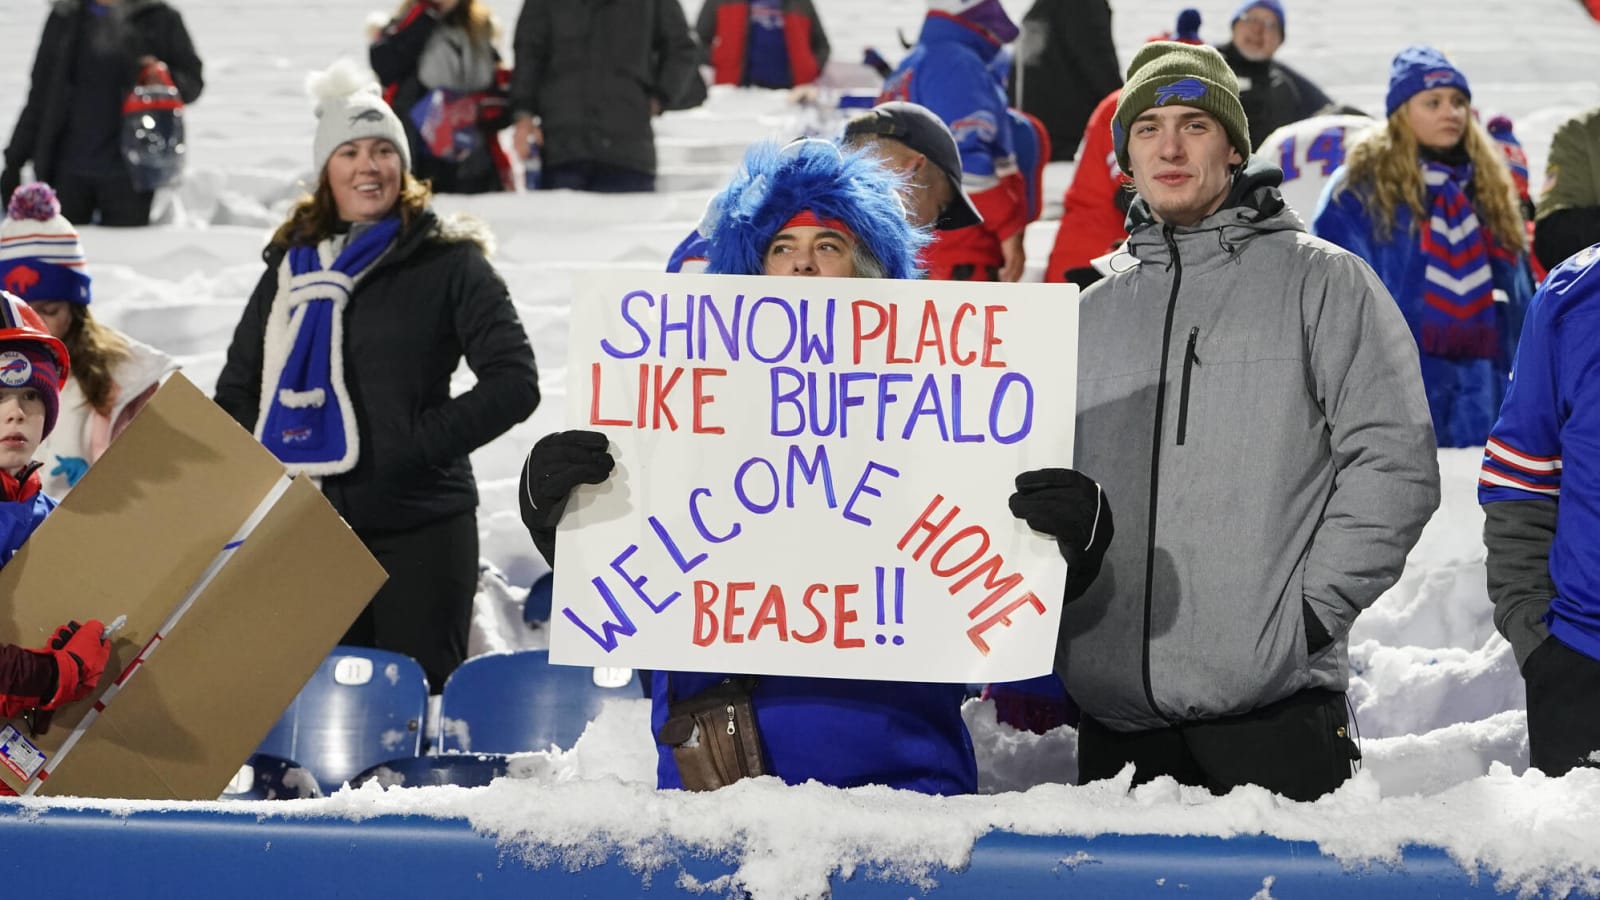 Bills get penalty after fans throw snowballs at Dolphins players